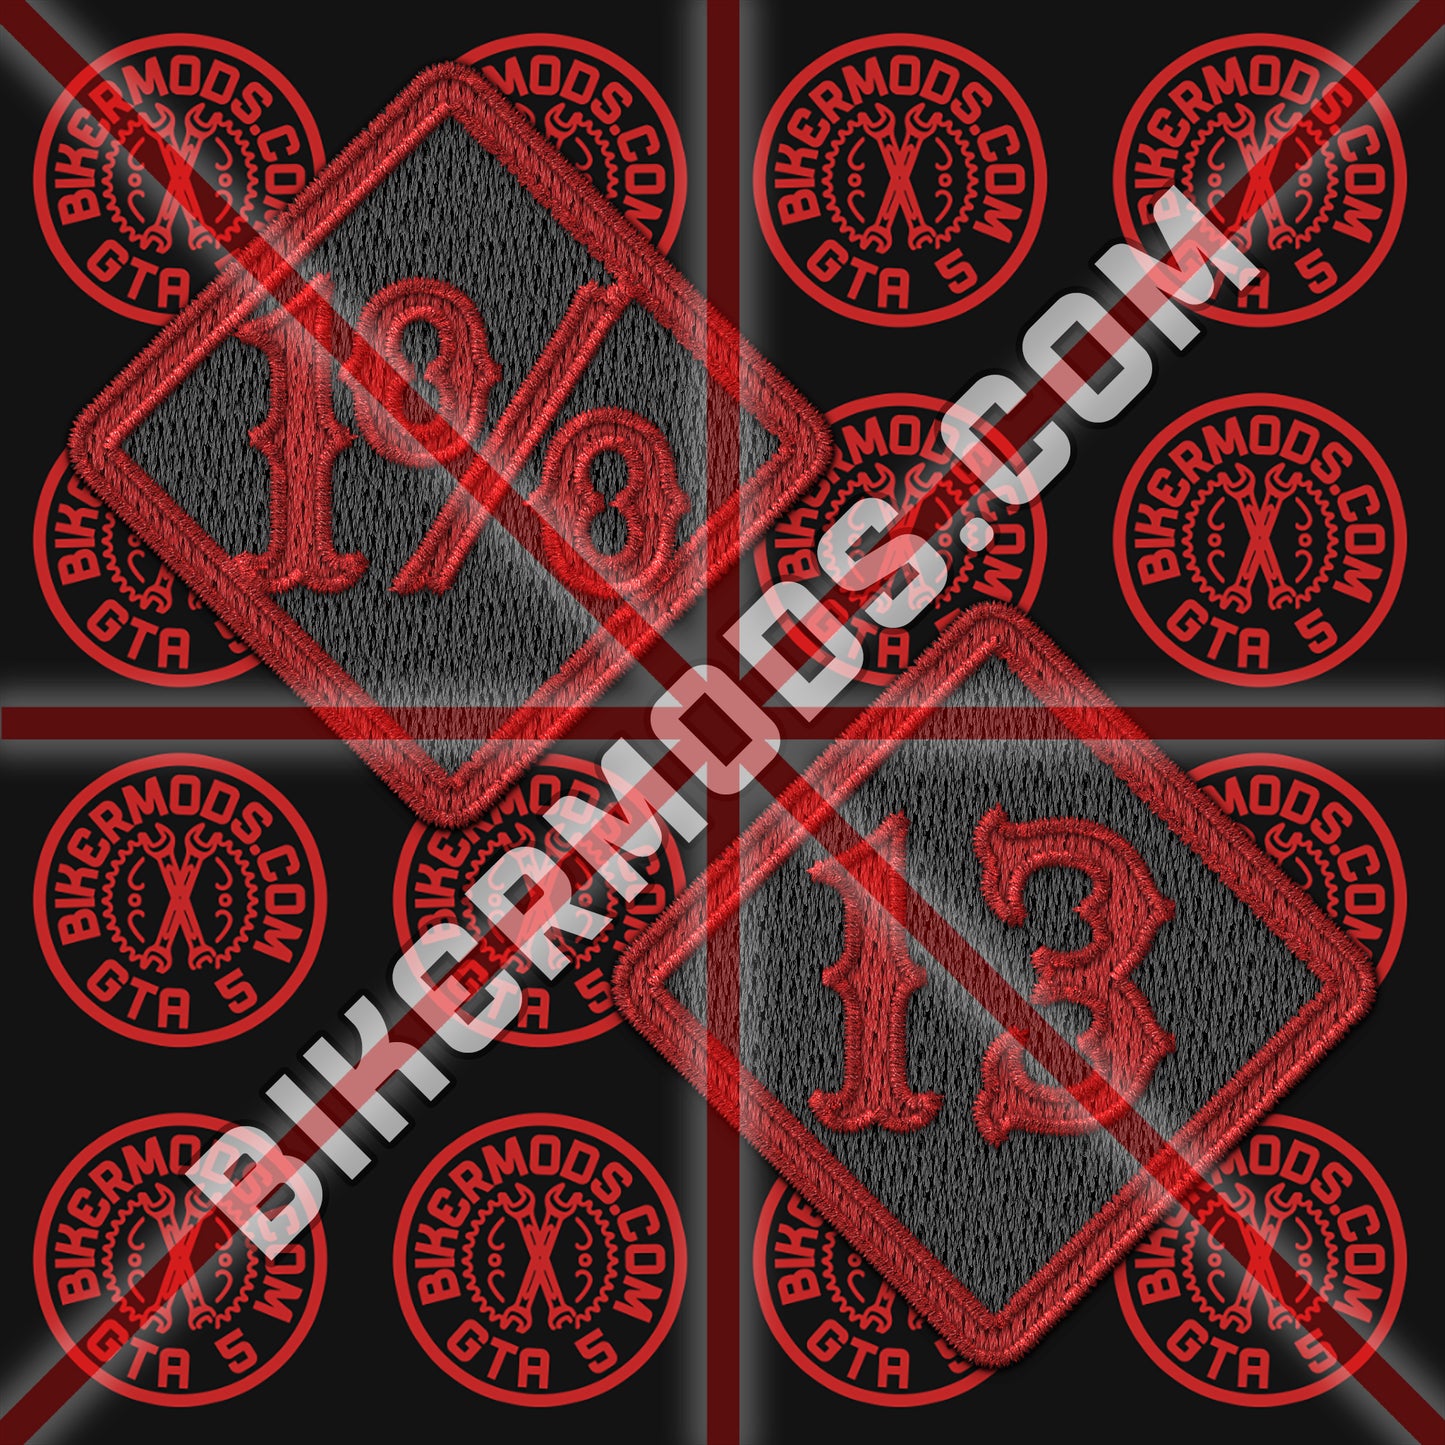 1% and 13 Patch Set (Black and Red)